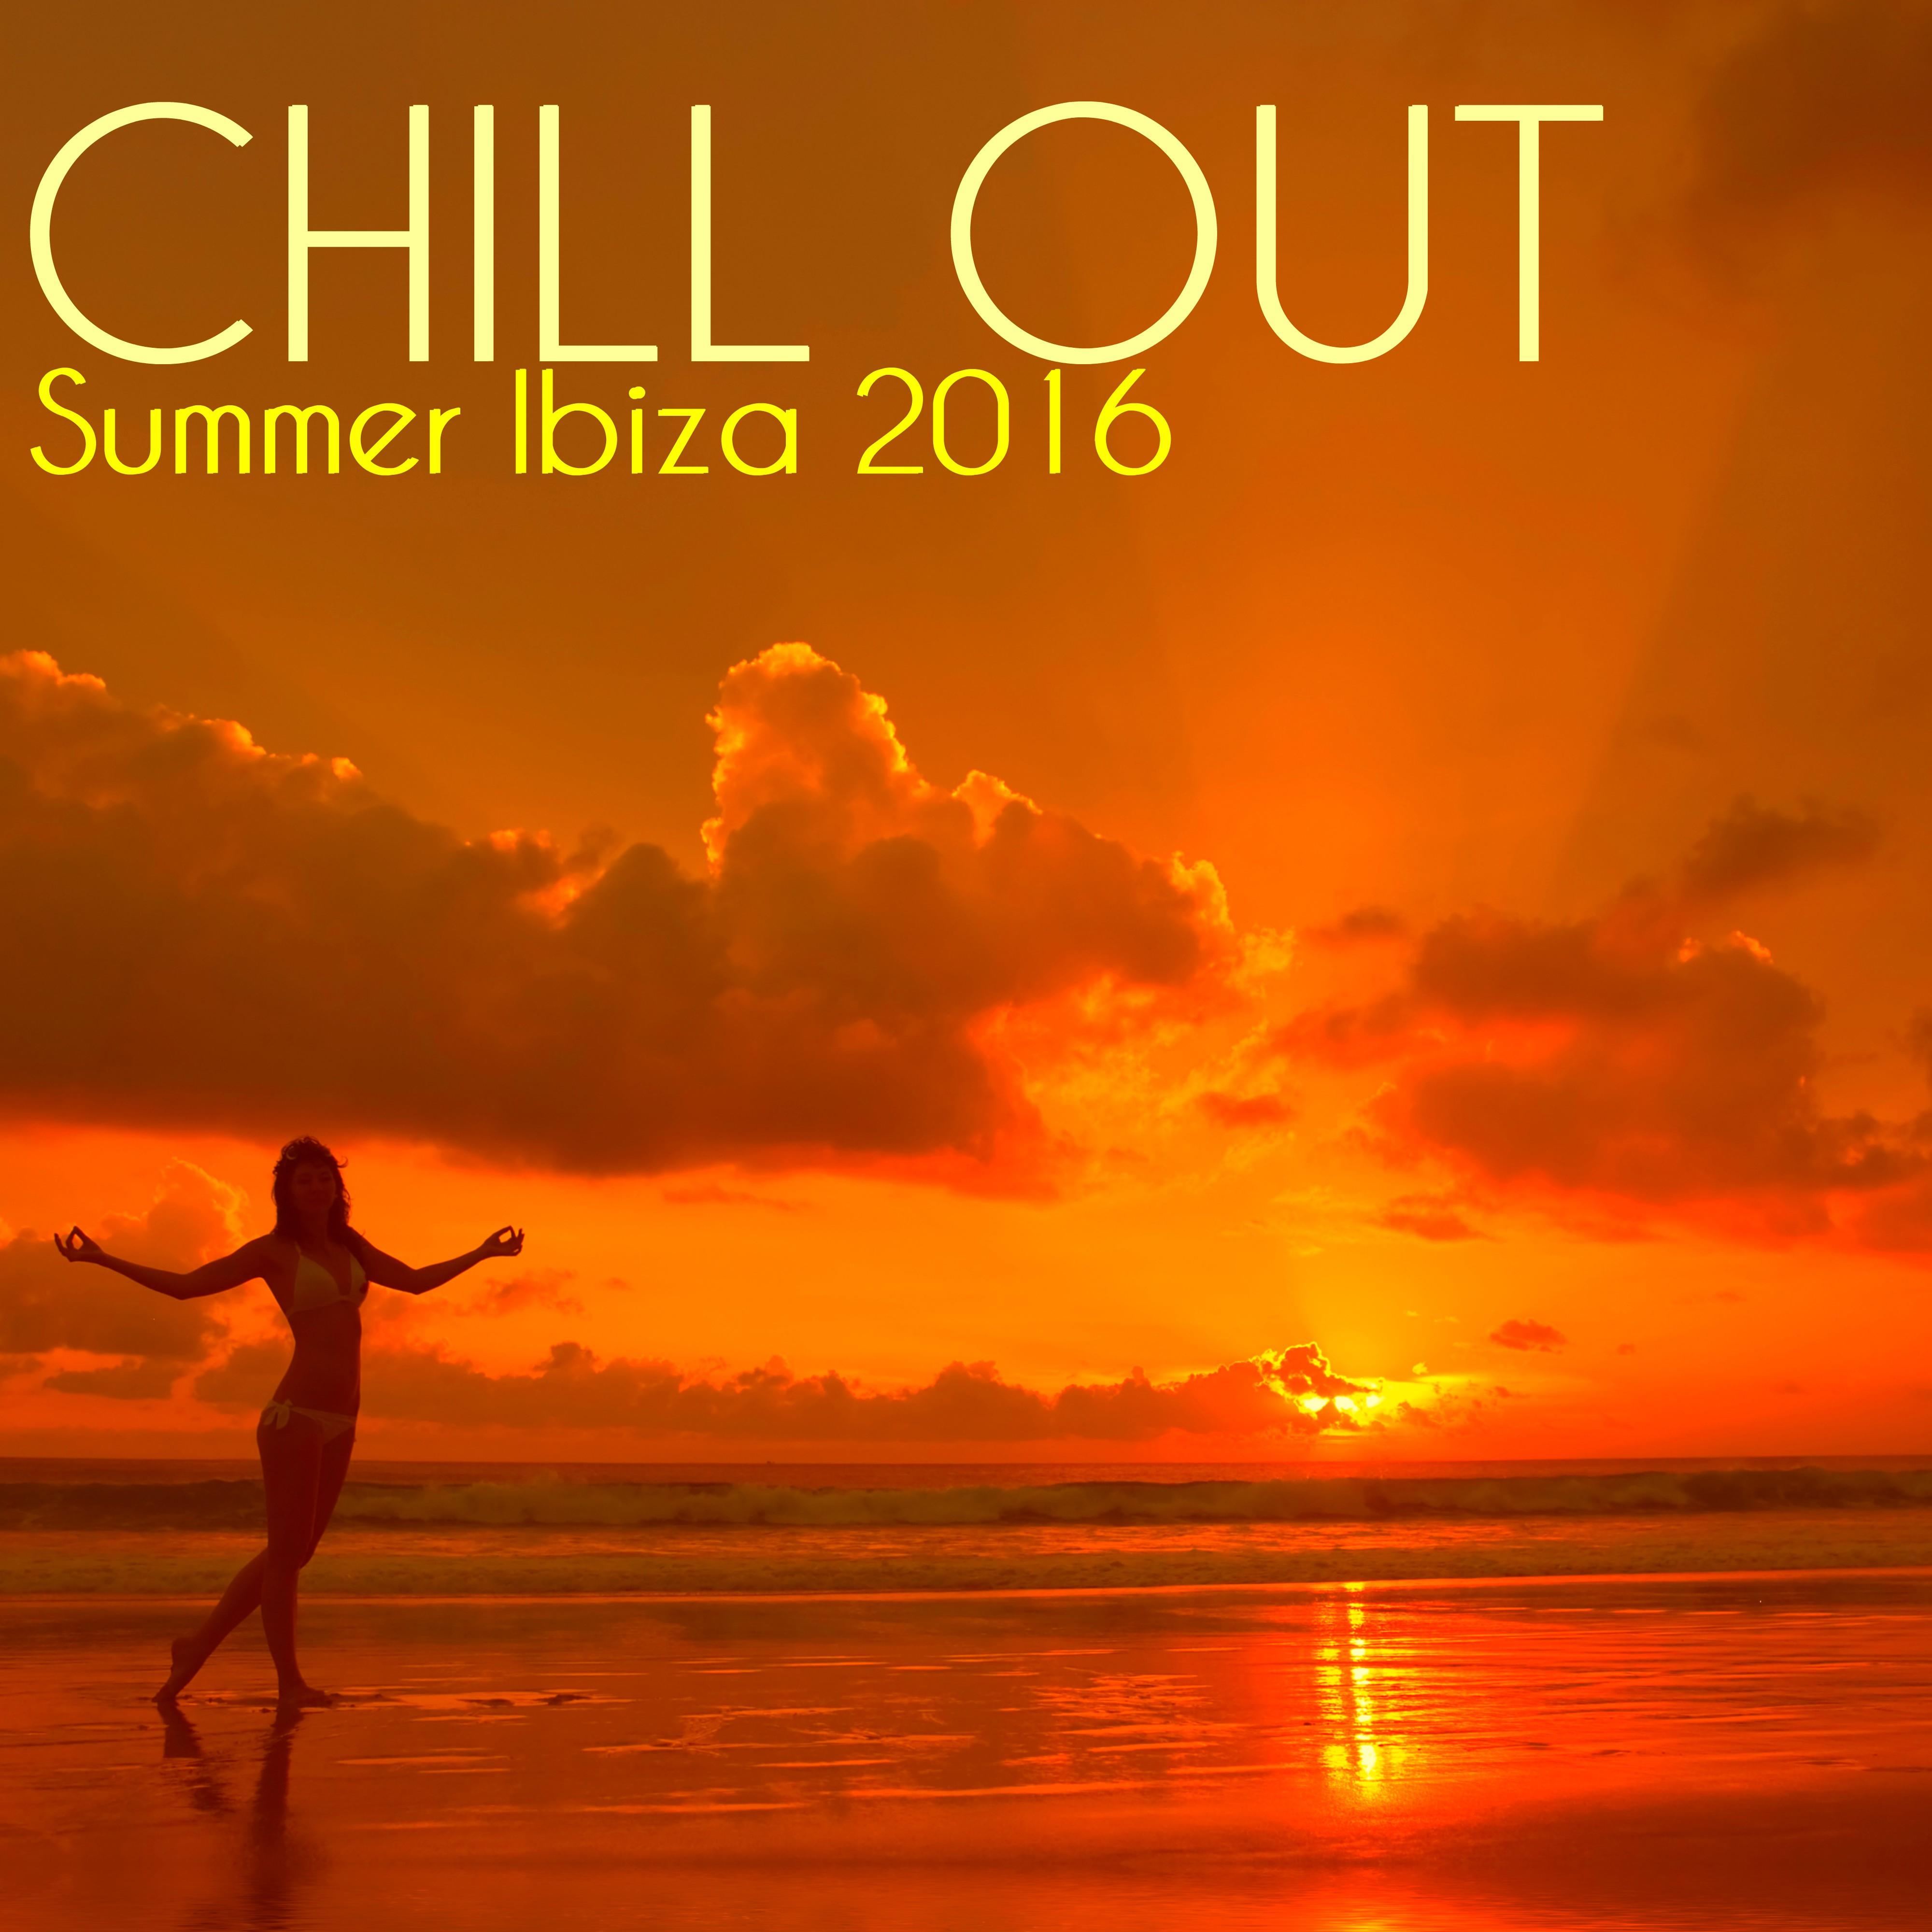 Chill Out Summer Ibiza 2016 - Chill Music Beach for Relaxing Moments, Cocktail, Happy Hour, Appetizers and Drinks Funny Background